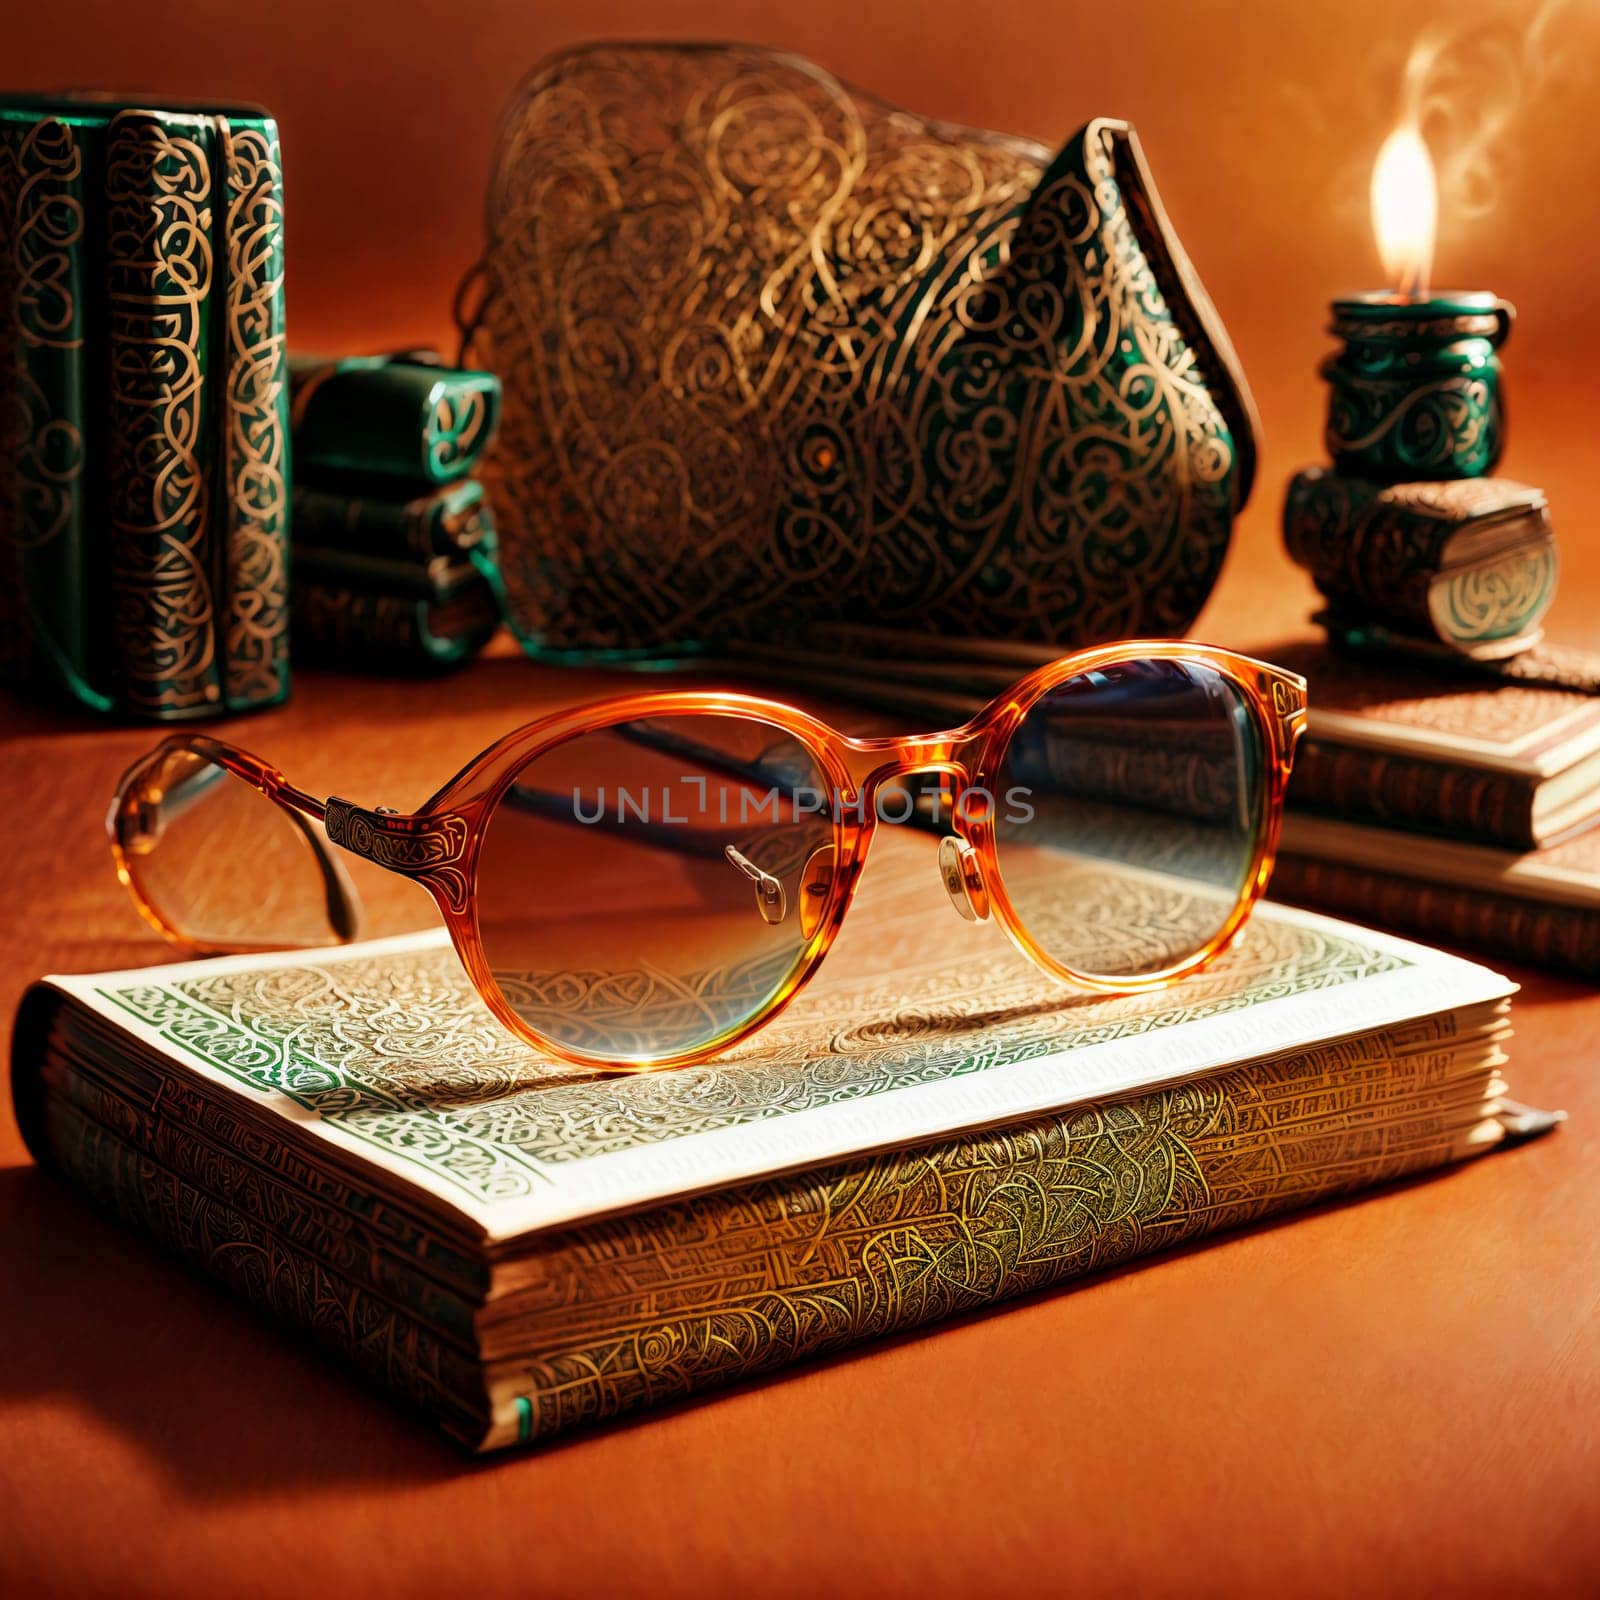 round glasses lying on top of a book on a red abstract background